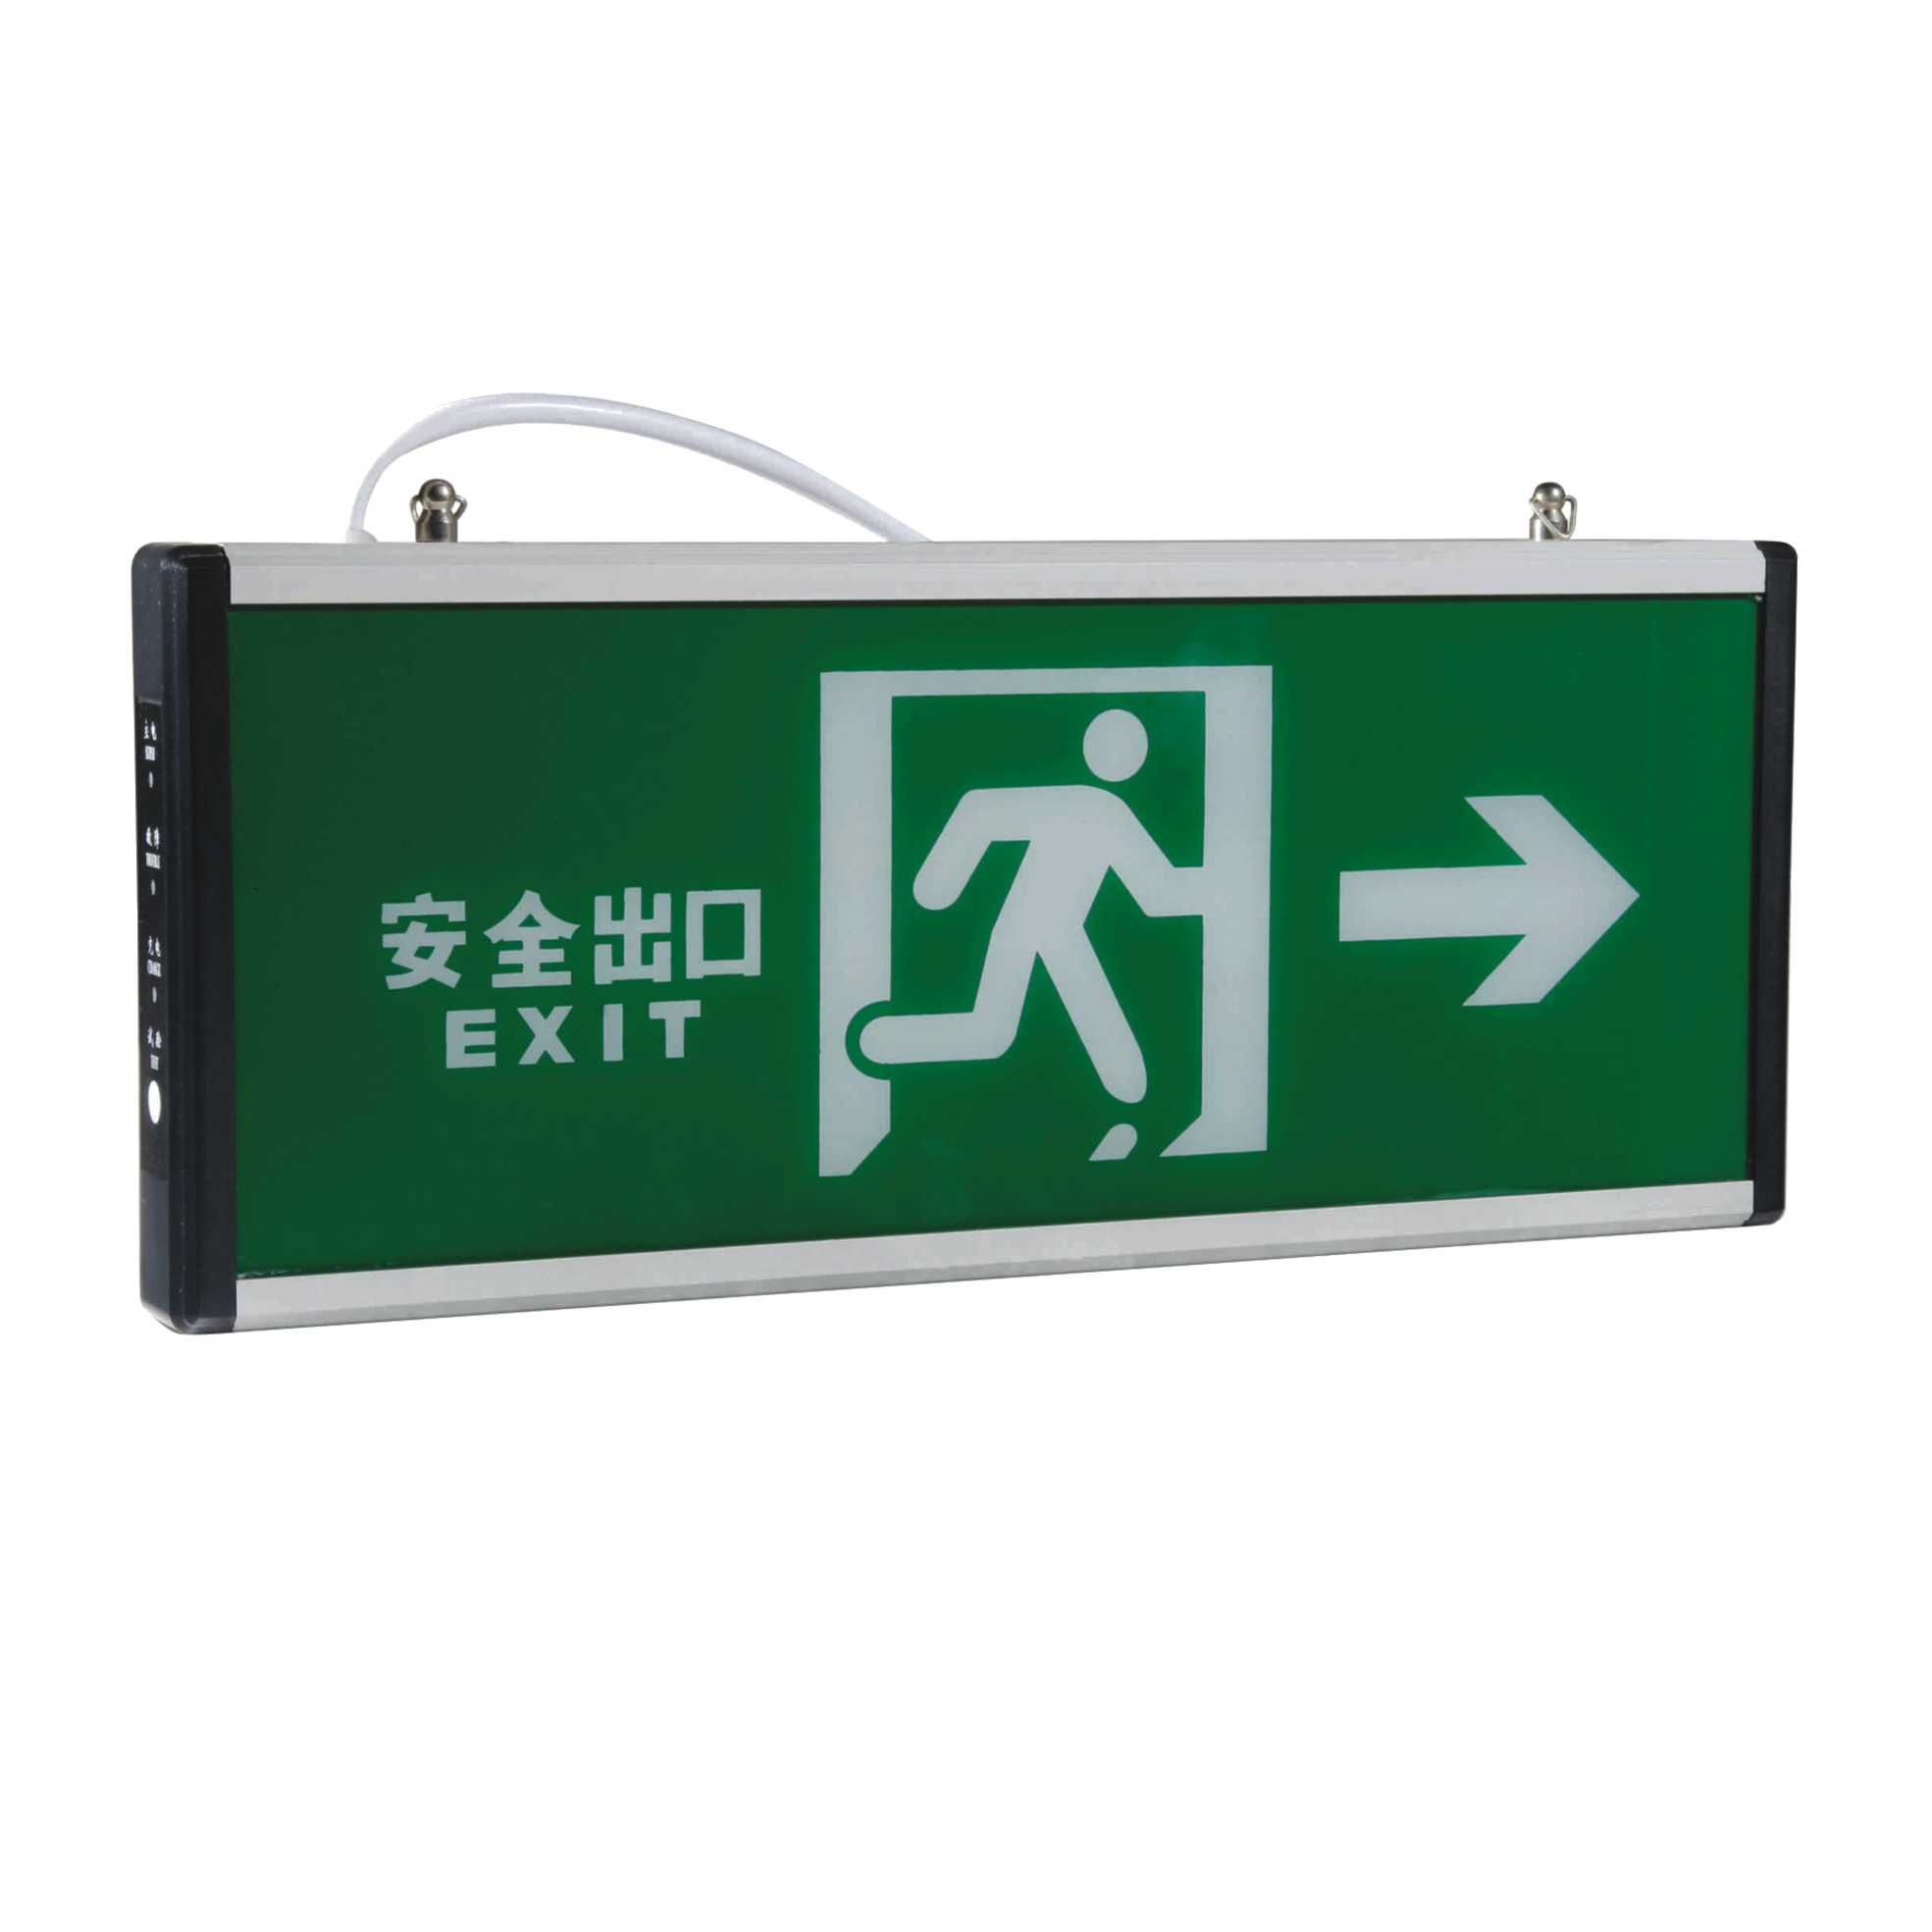 Exit Sign 01